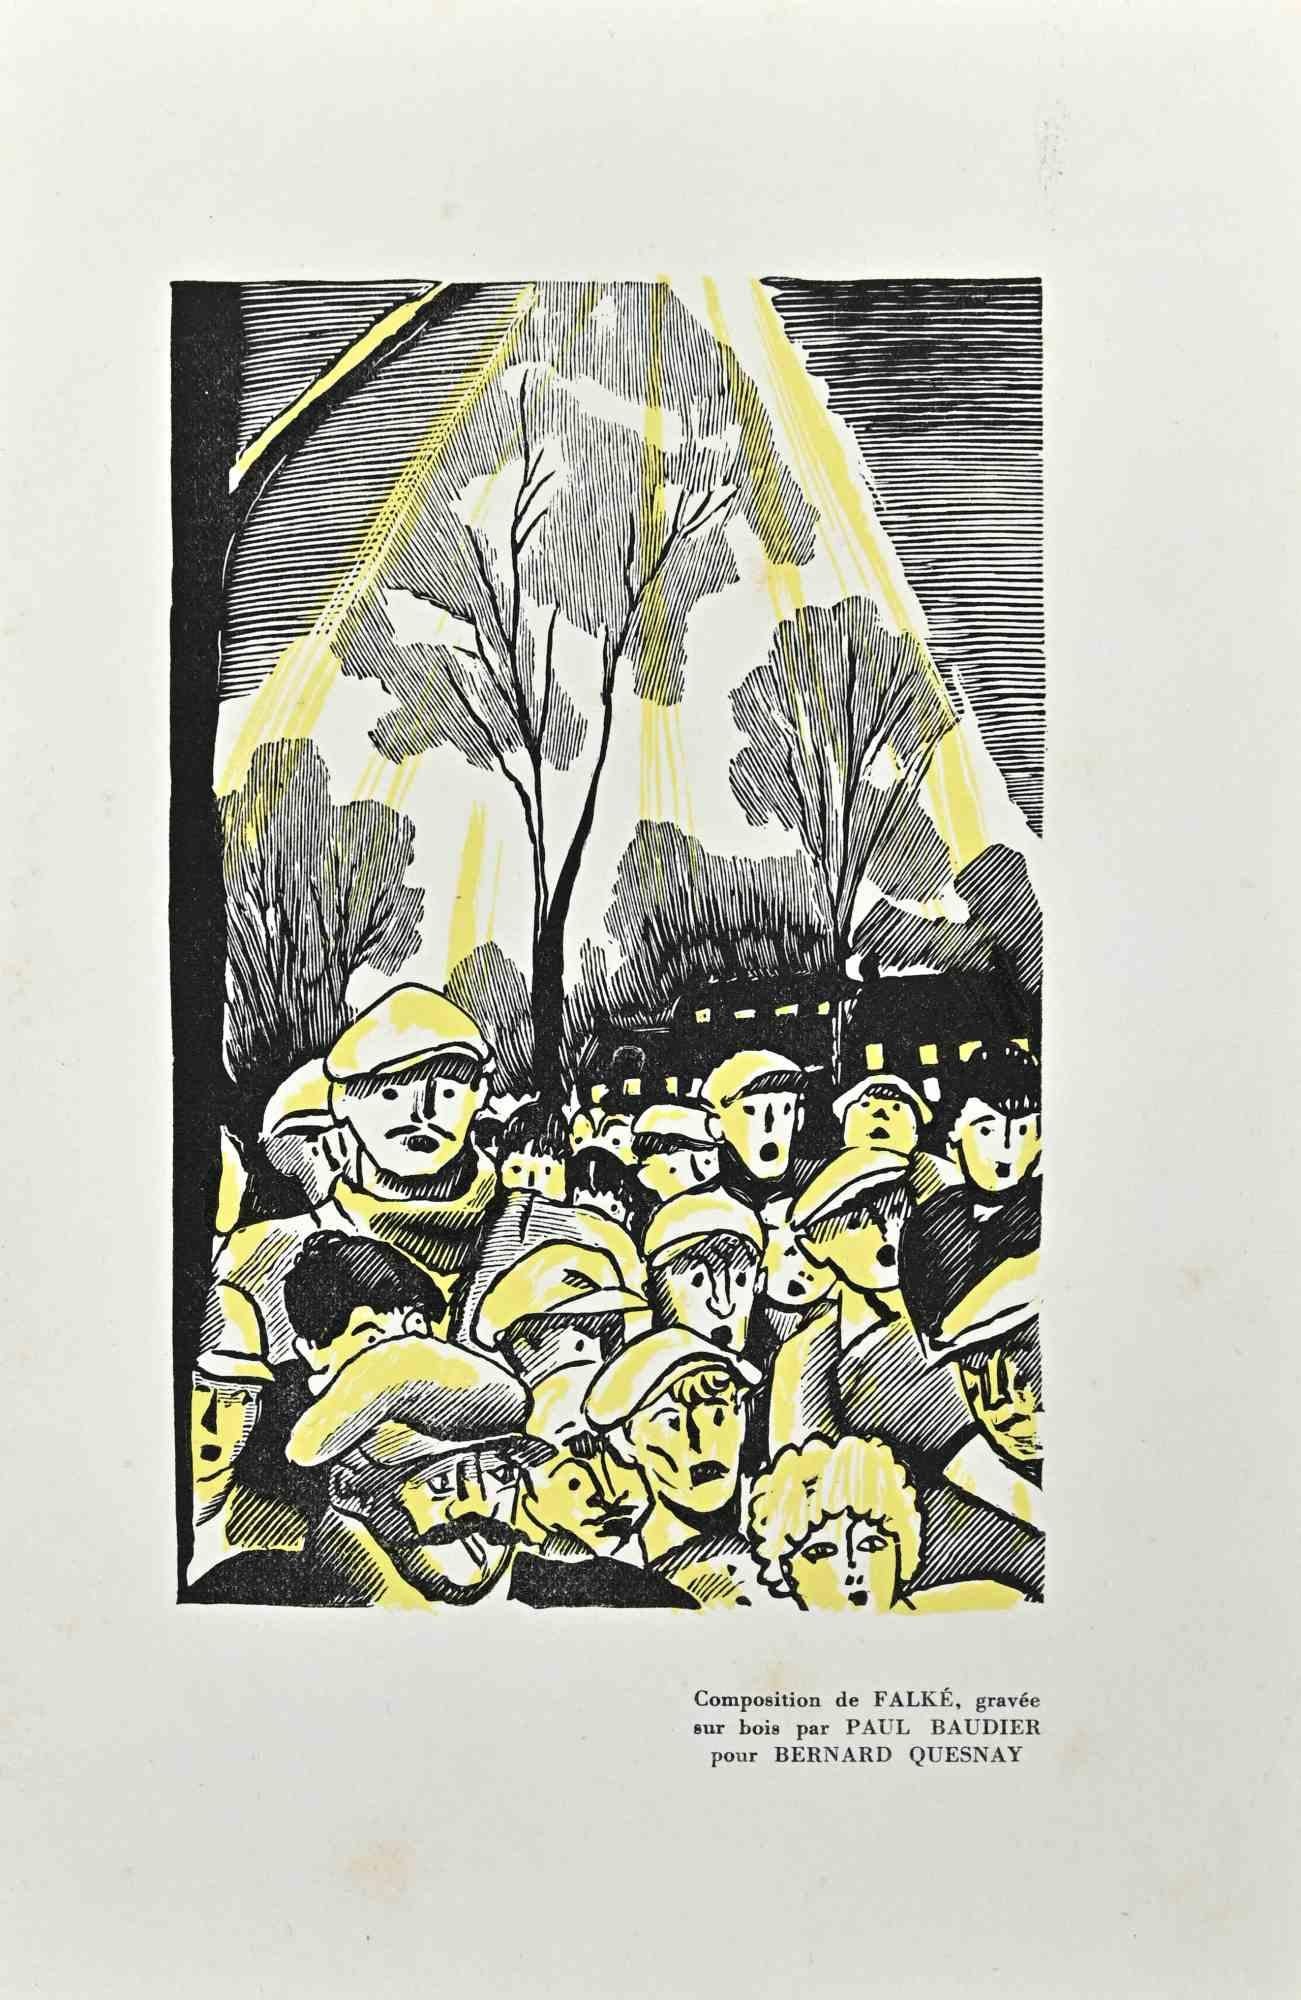 The Crowd is an original woodcut print on ivory-colored paper realized by Paul Baudier (1881-1962) in the 1930s.

On the lower right description in French.

Very good conditions.

Paul Baudier, (born October 18, 1881 in Paris and died December 9,